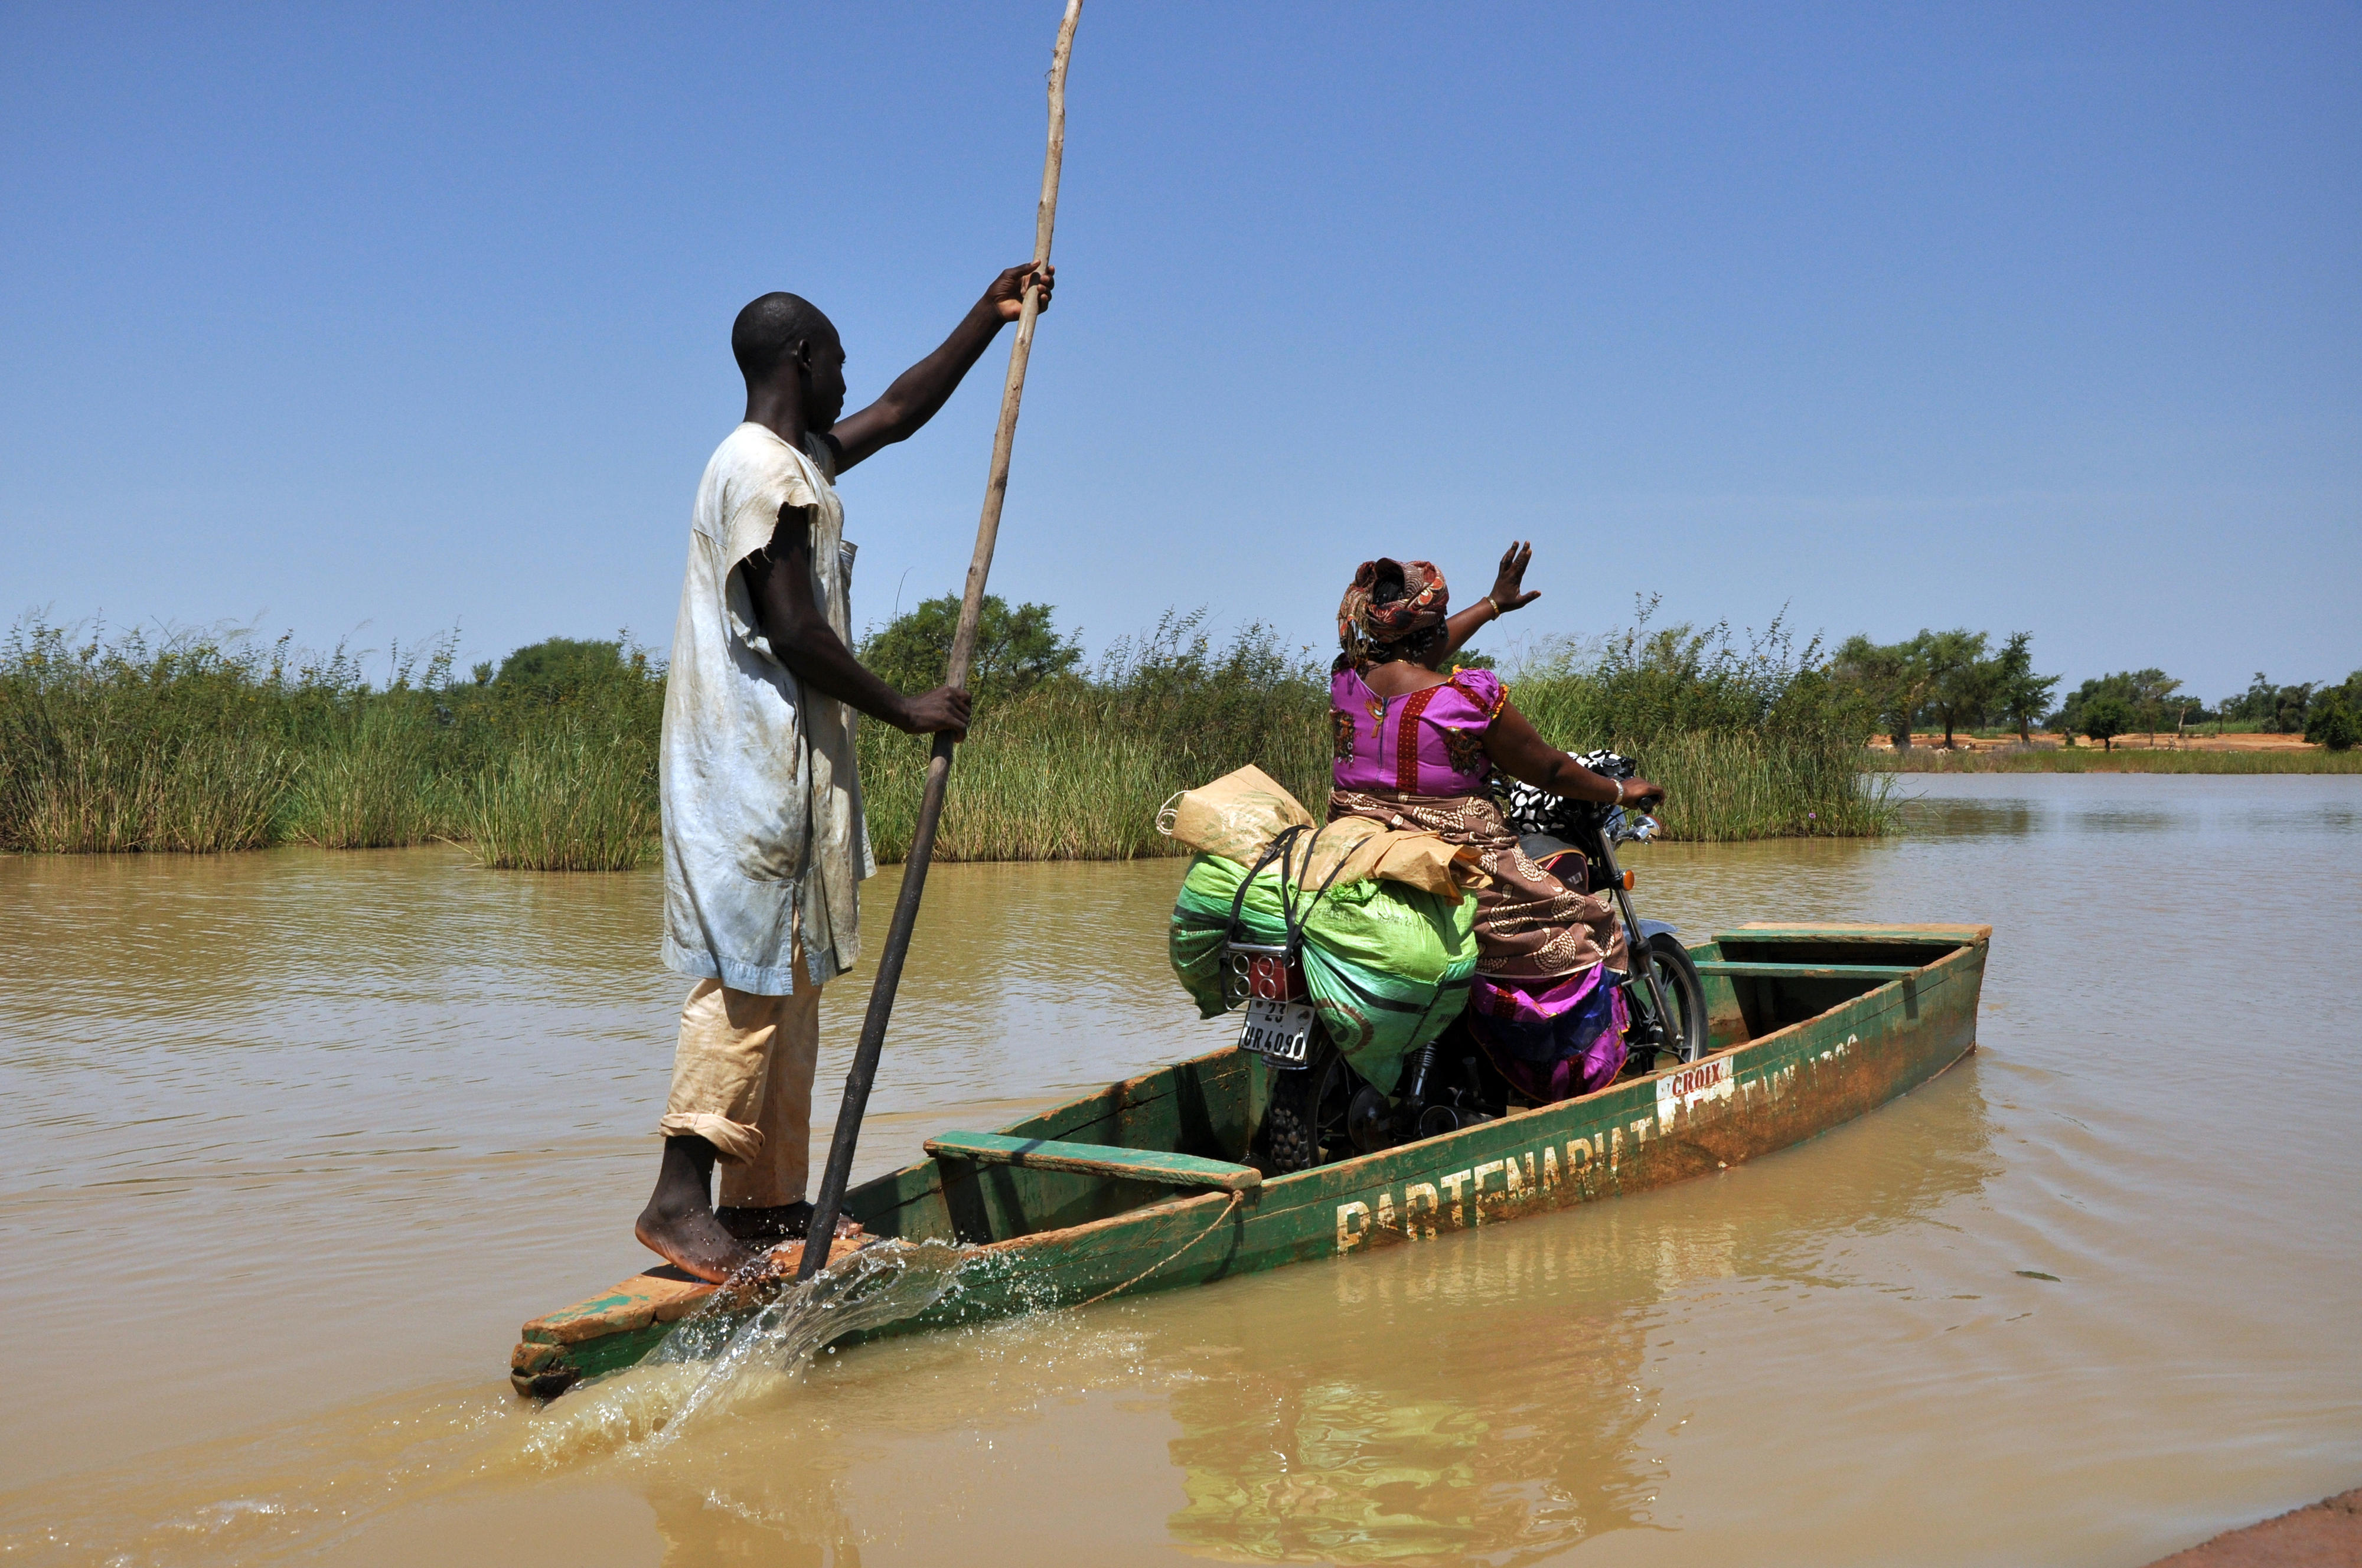 Transport during a flooding in Burkina Faso